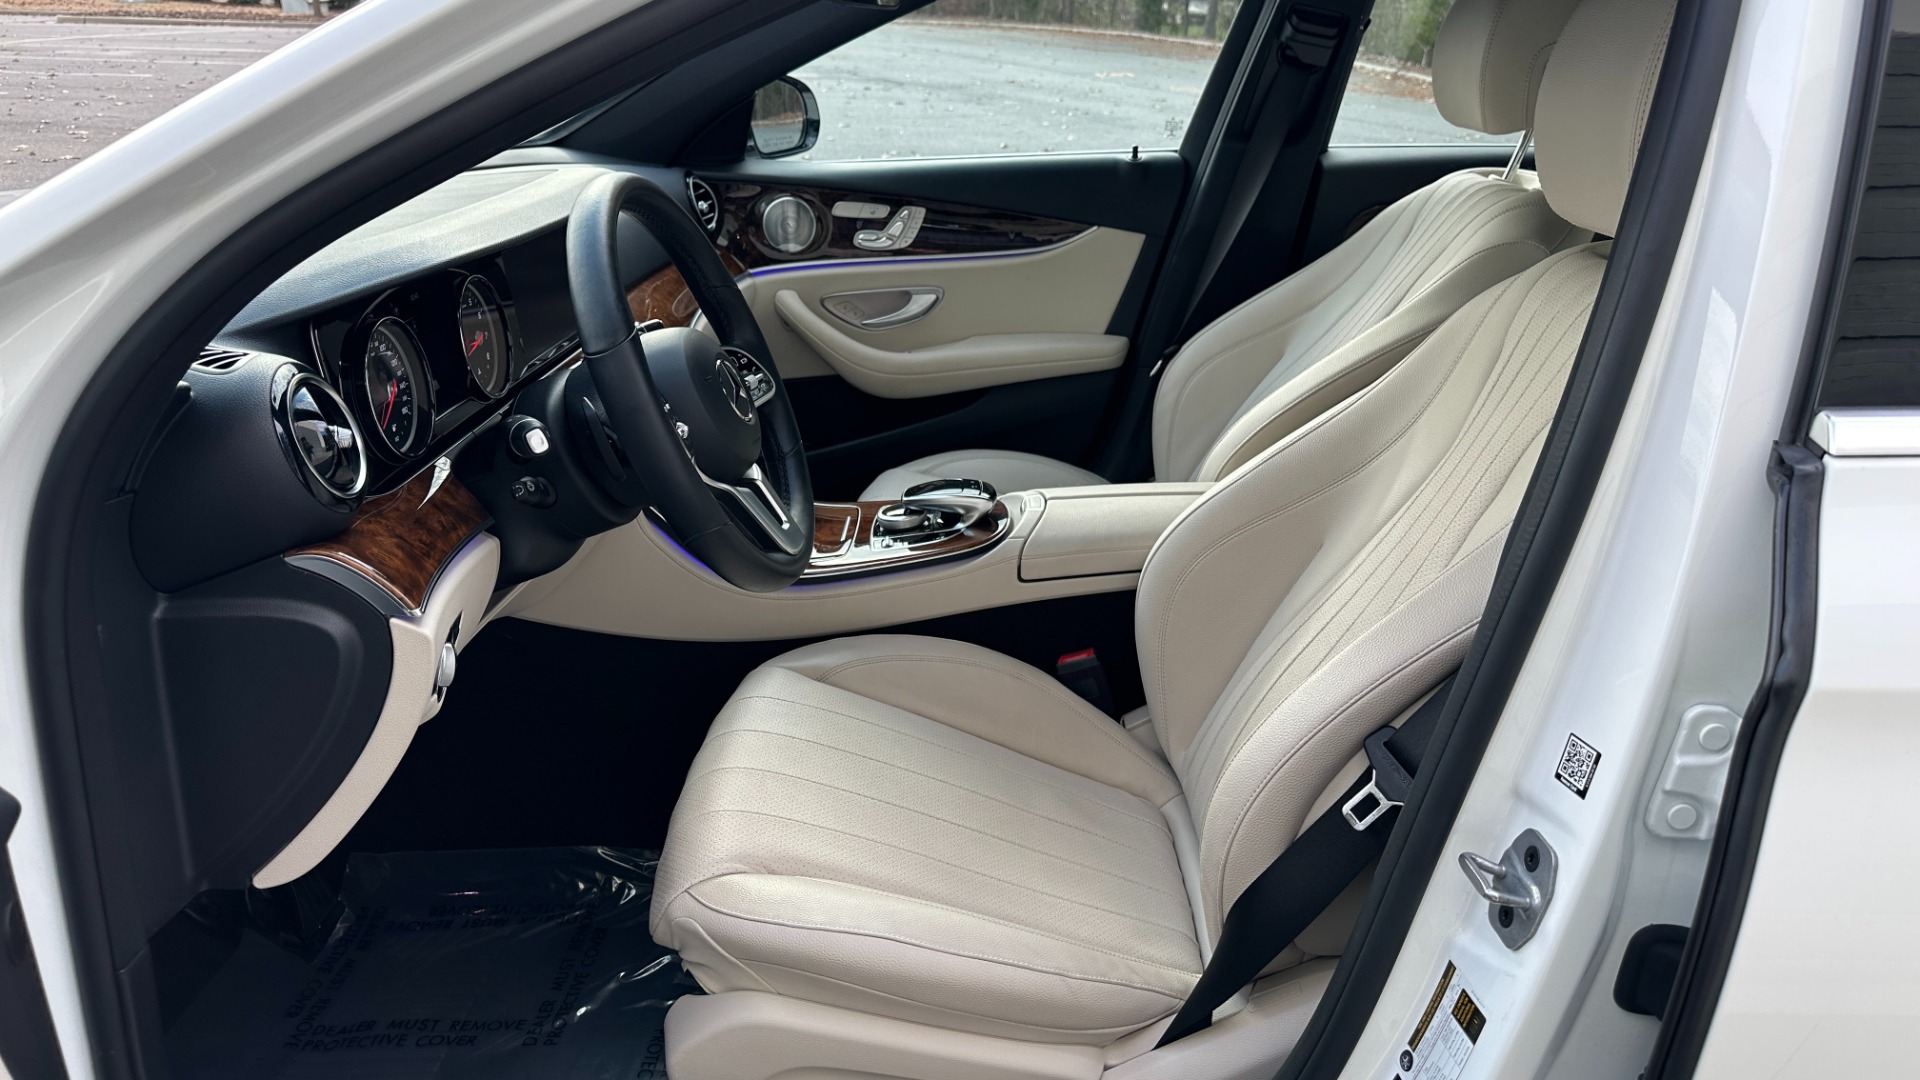 Used 2019 Mercedes-Benz E-Class E300 / PREMIUM PACKAGE / BLIND SPOT / BURMESTER SOUND / HEATED STEERING for sale $35,400 at Formula Imports in Charlotte NC 28227 11